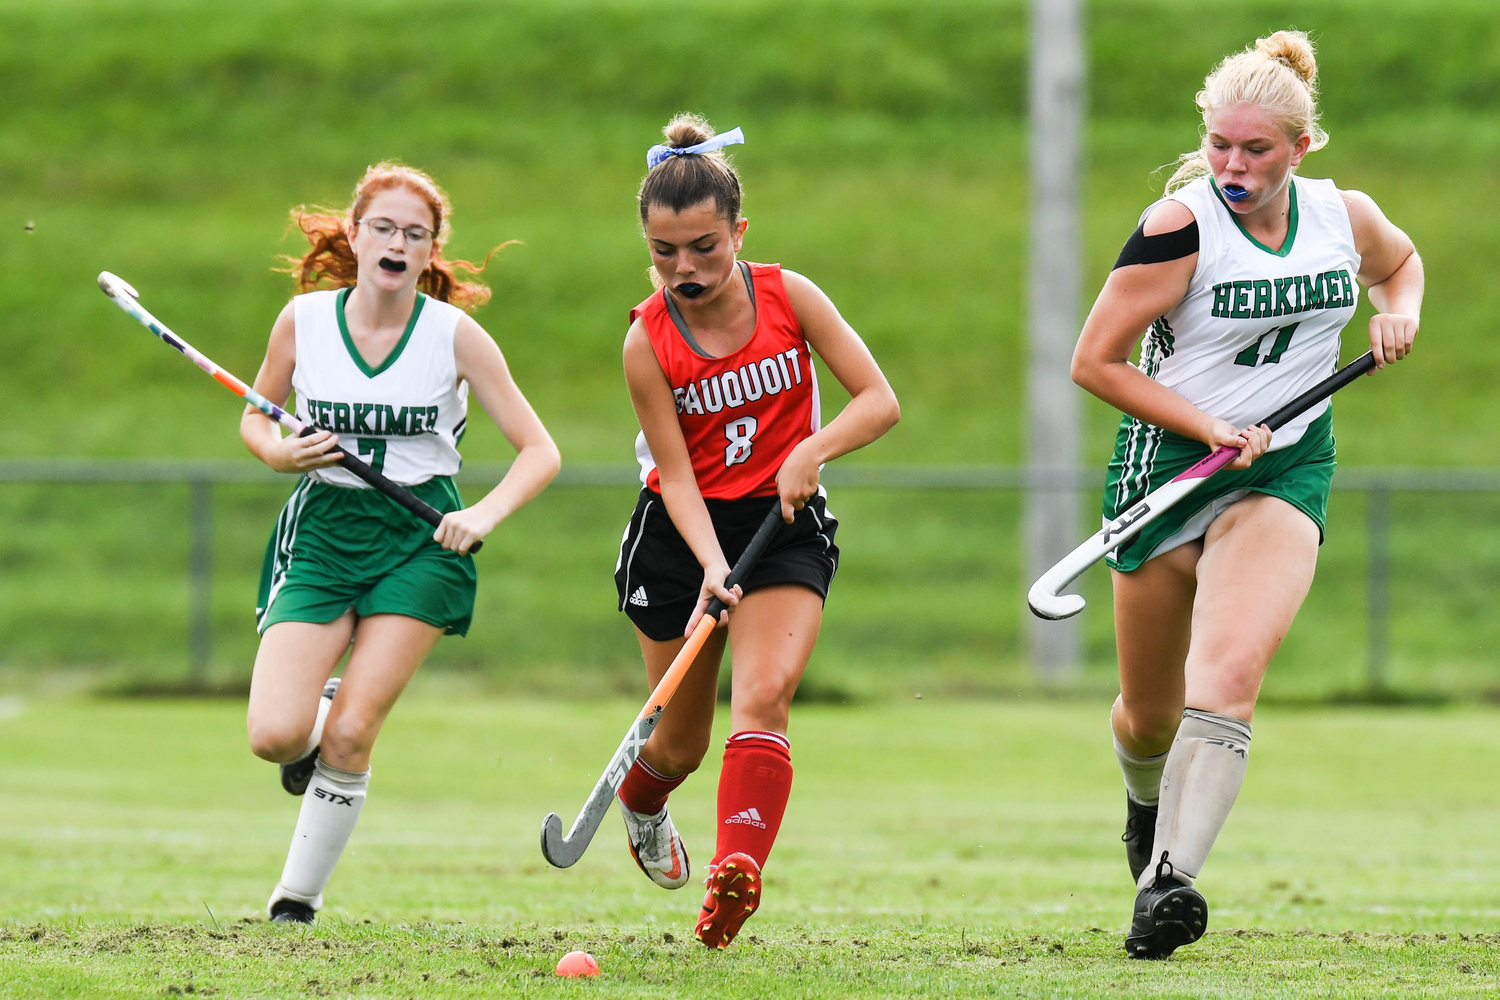 Sauquoit Valley player Isabella Canarelli (8) moves the ball between Herkimer defenders Hanna Uebele (7) and Emily Marquissee (11) during the Center State Conference field hockey game on Monday in Herkimer. The two teams played to a scoreless tie.